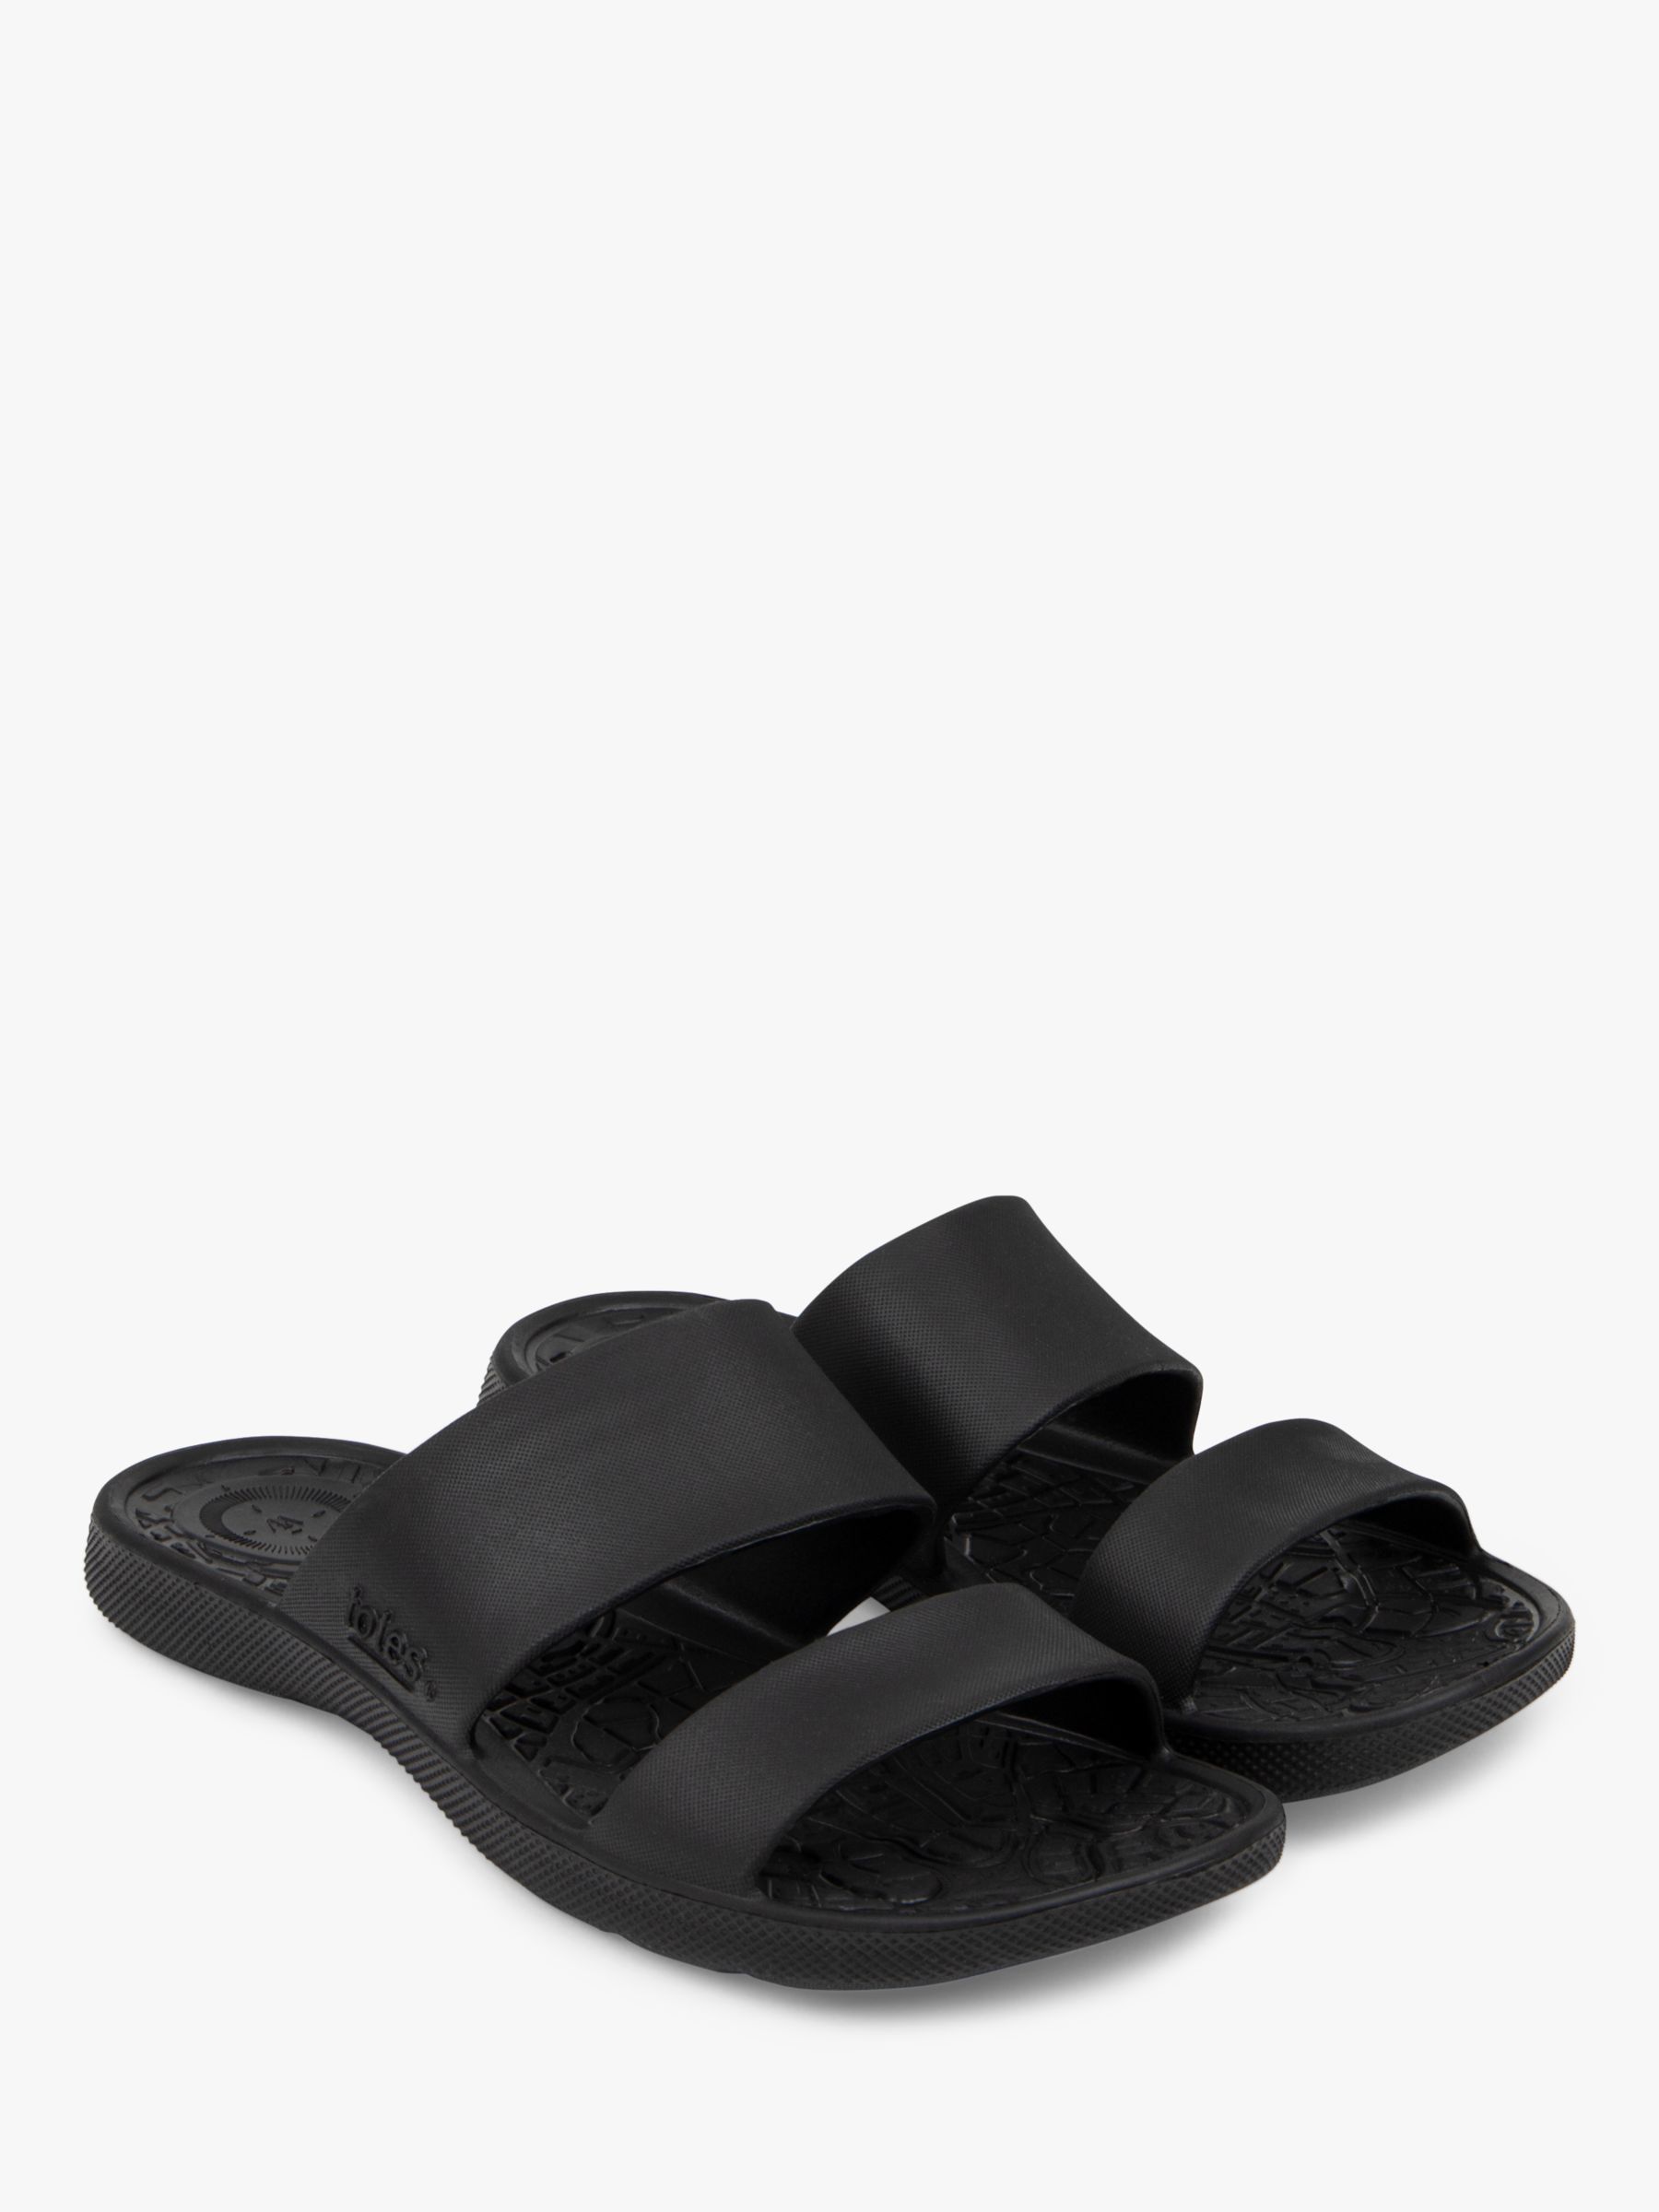 totes SOLBOUNCE Double Strap Slider Sandals, Black at John Lewis & Partners